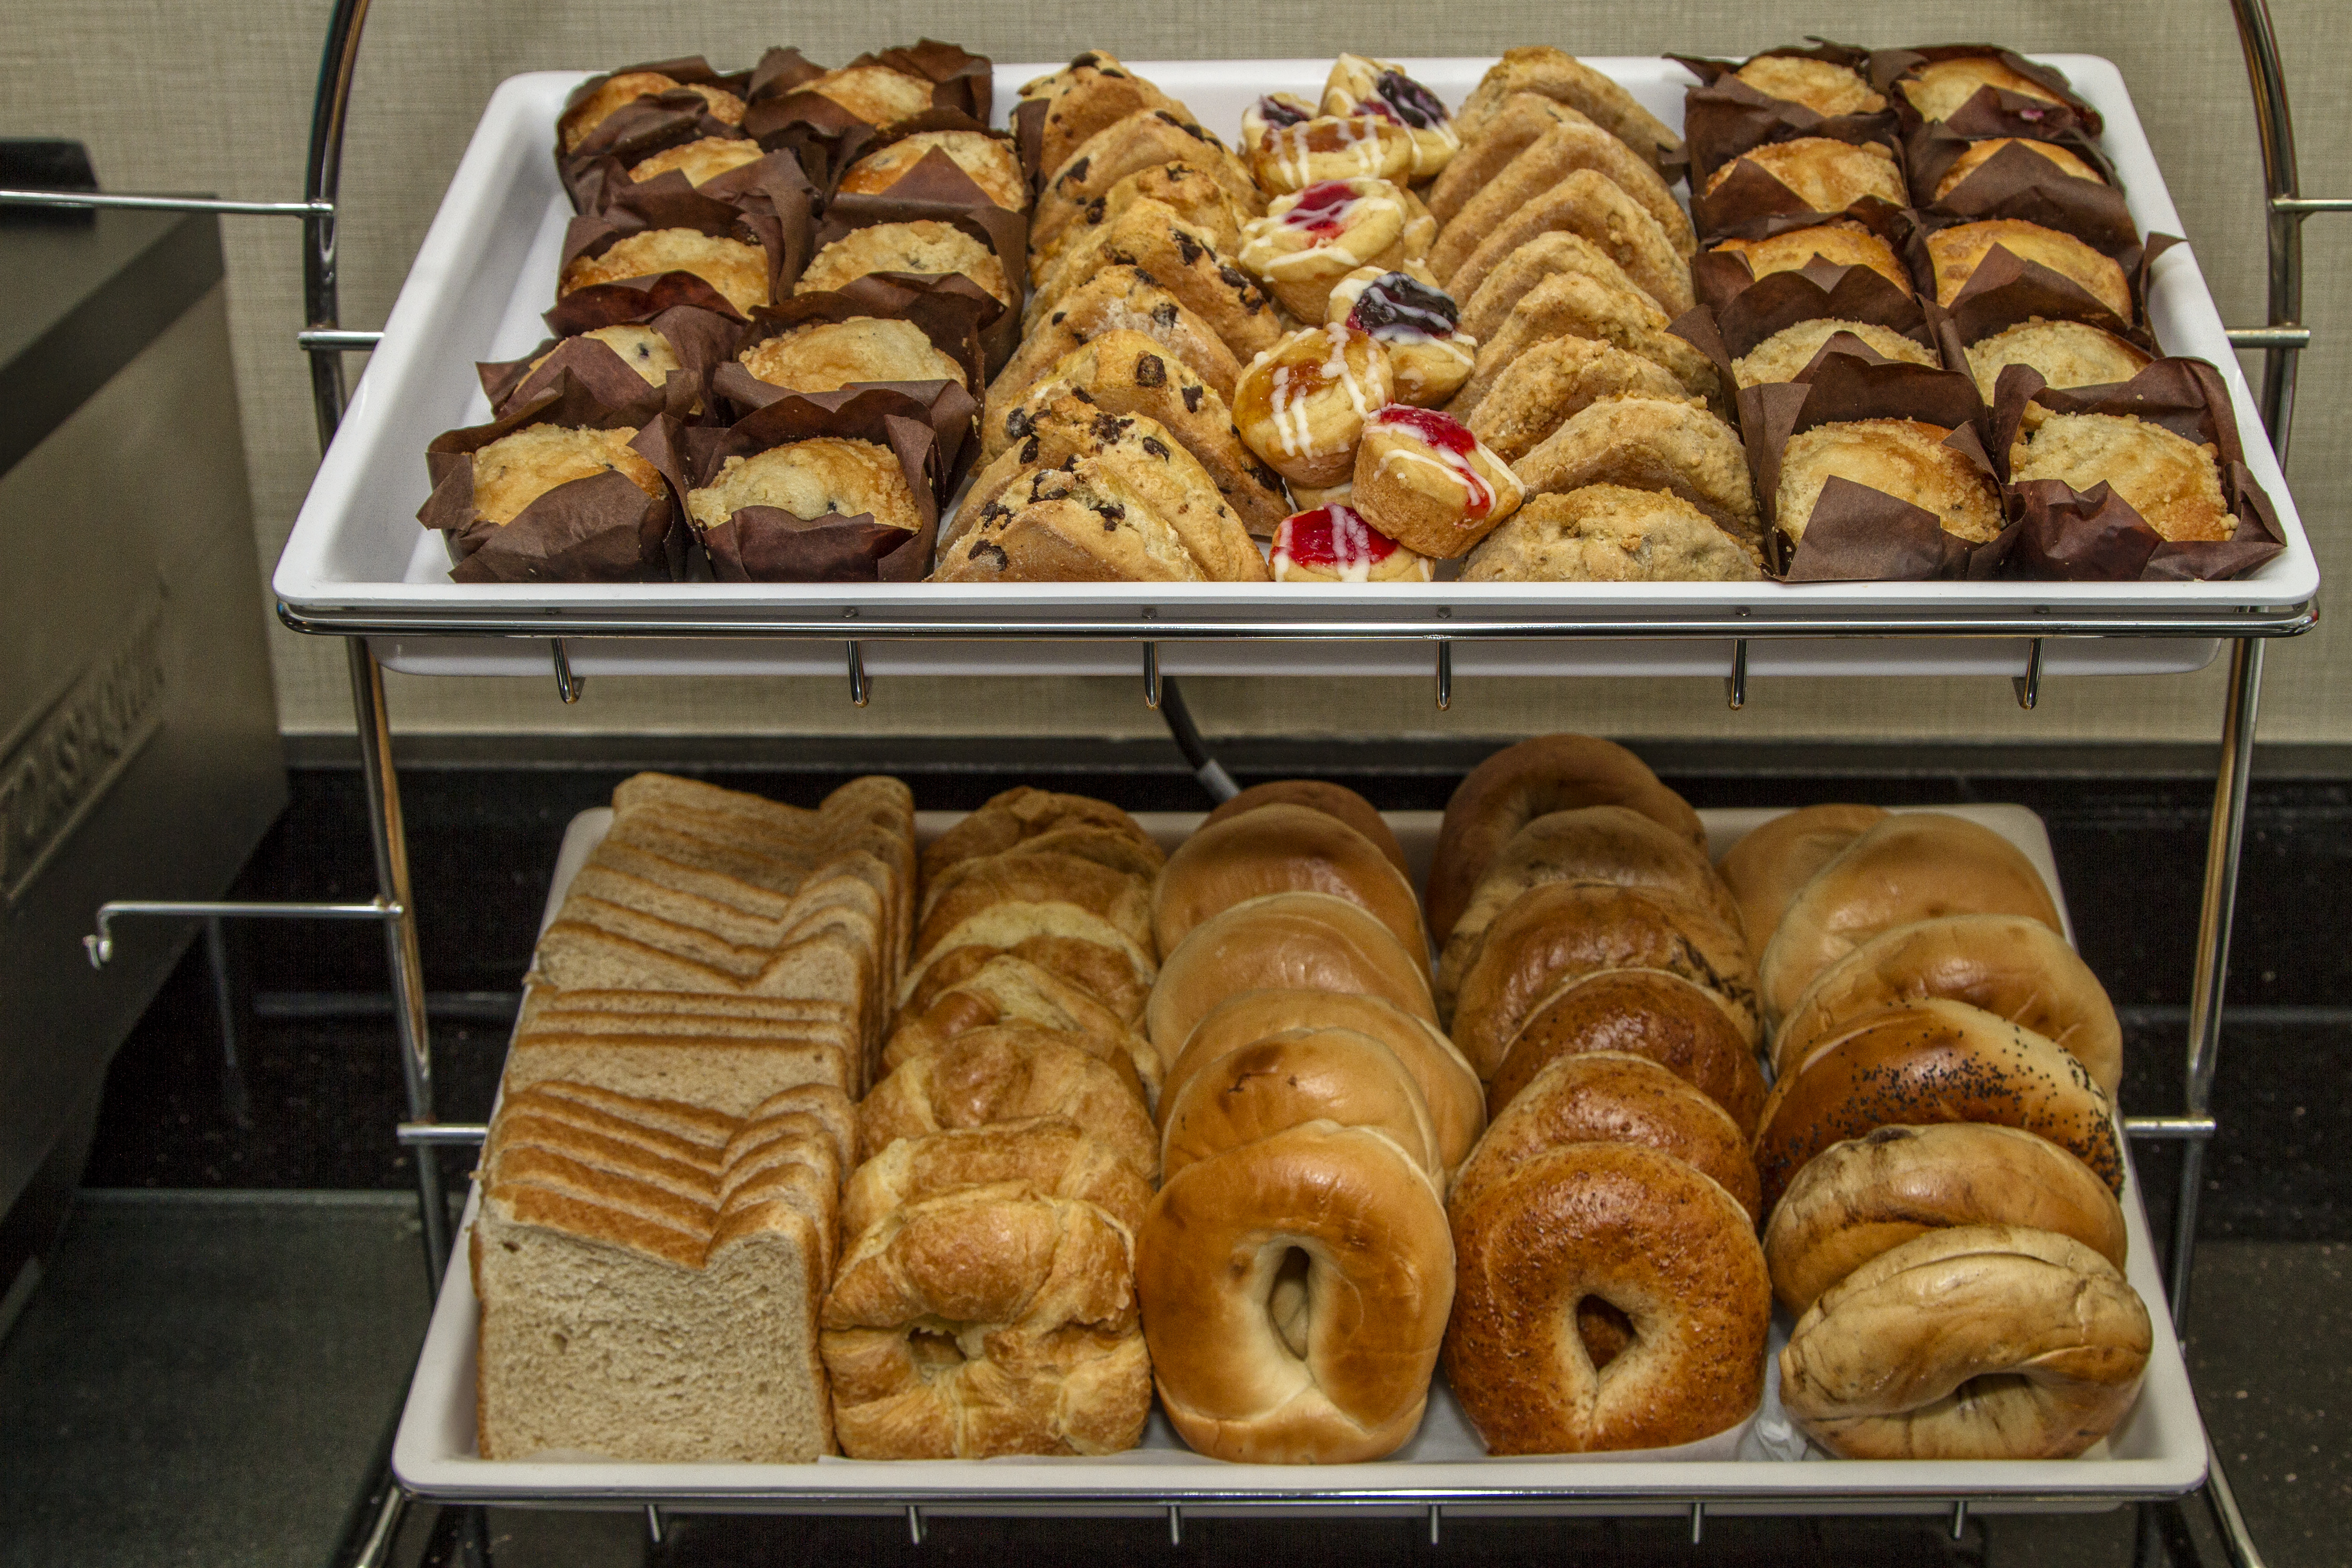 Baked Items at Breakfast Buffet